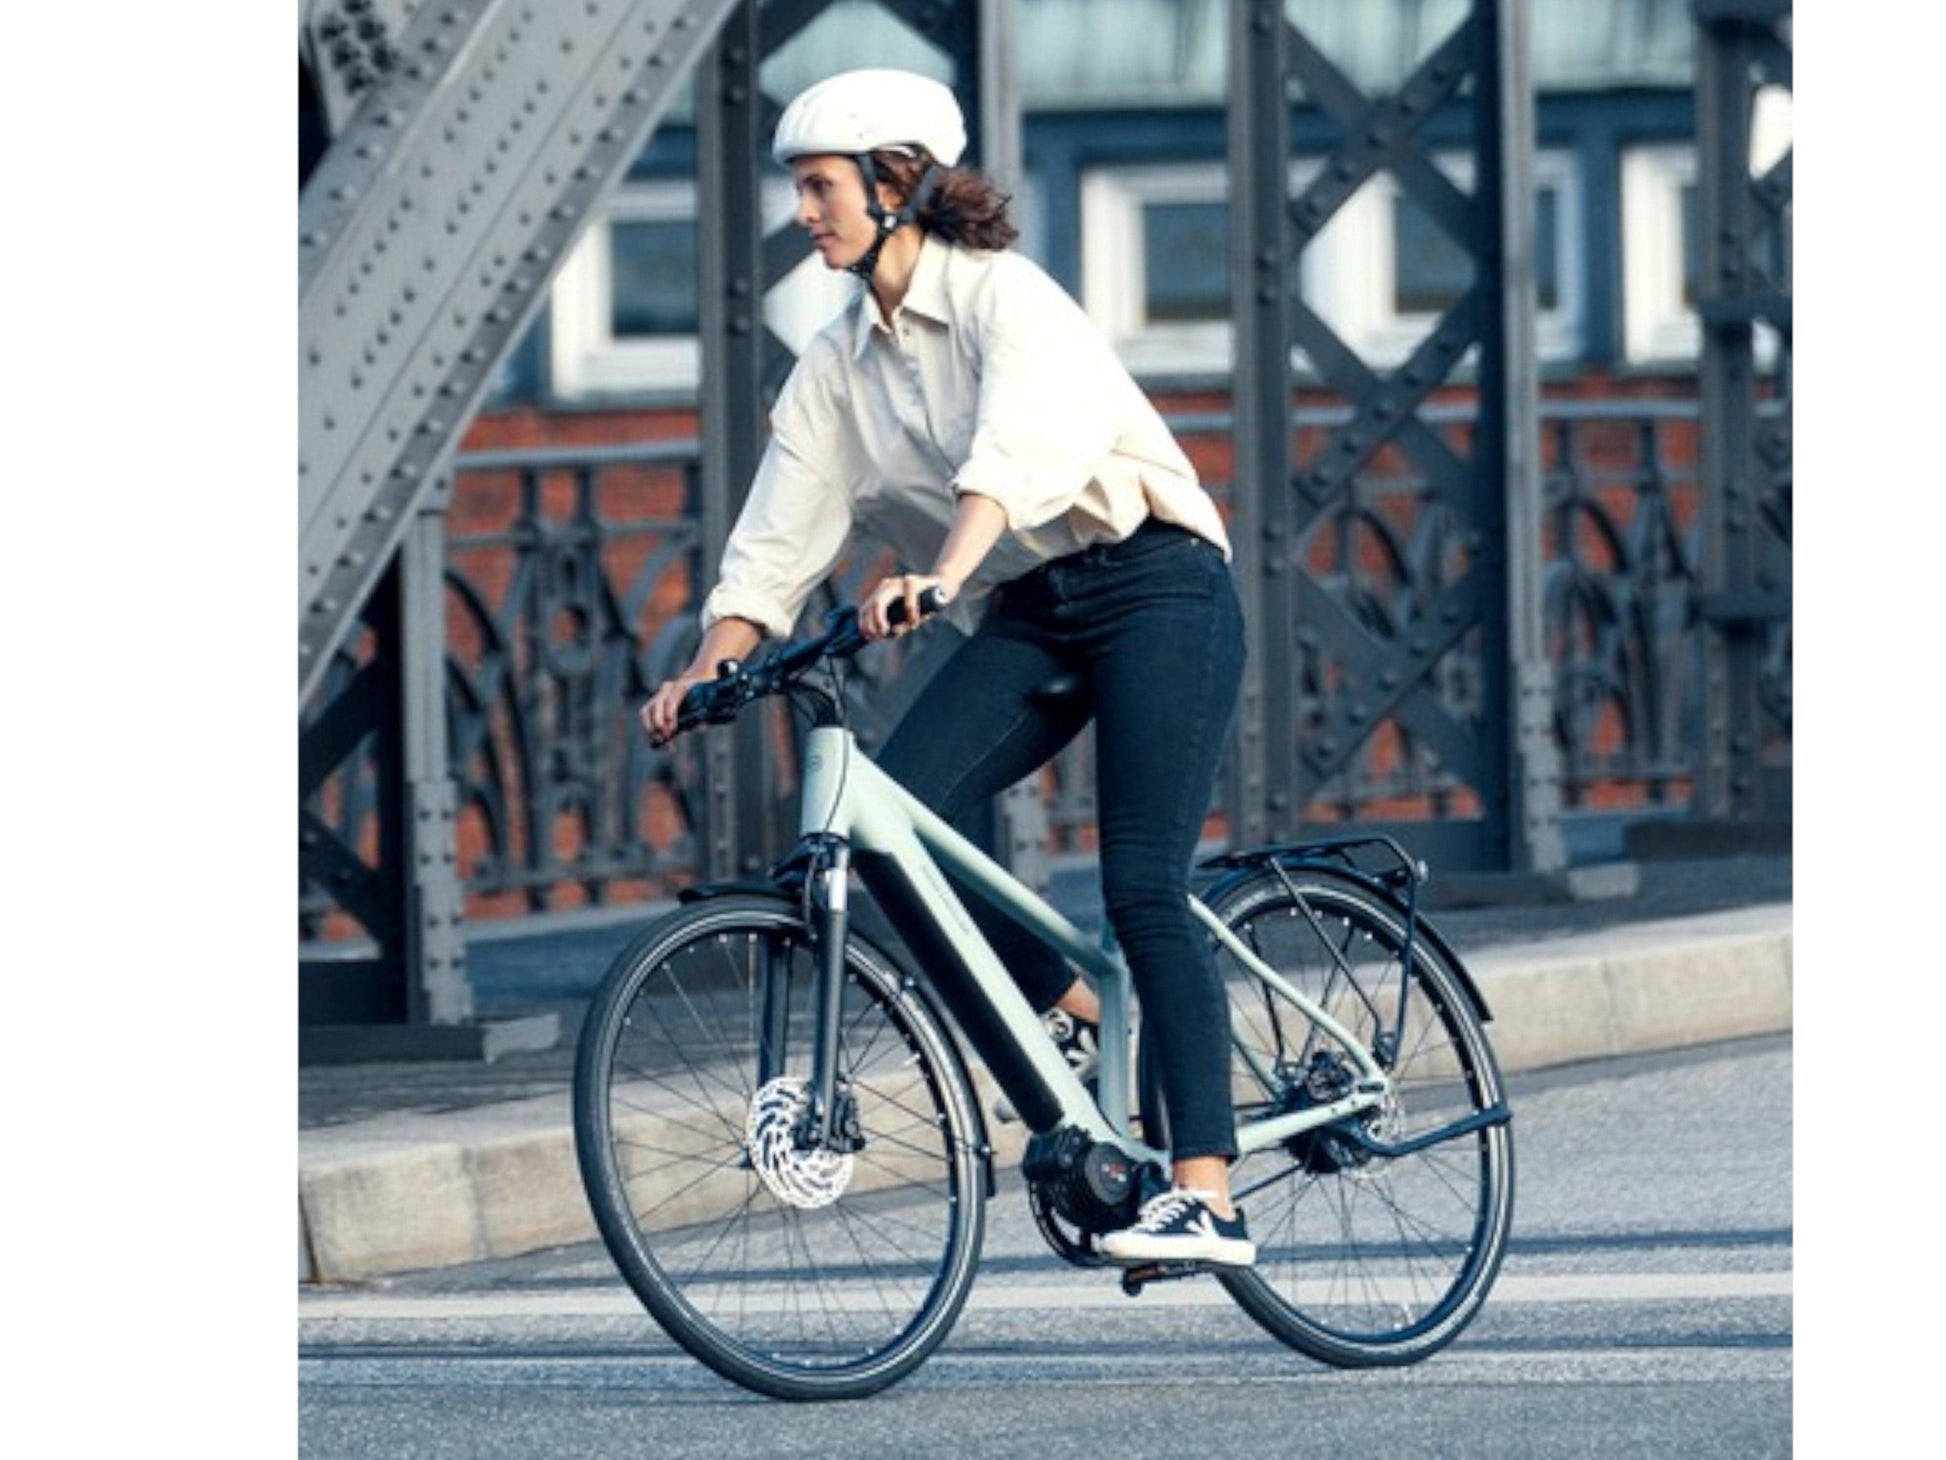 Riese and Muller Roadster Mixte Vario HS eMTB hardtail woman commuting on city streets